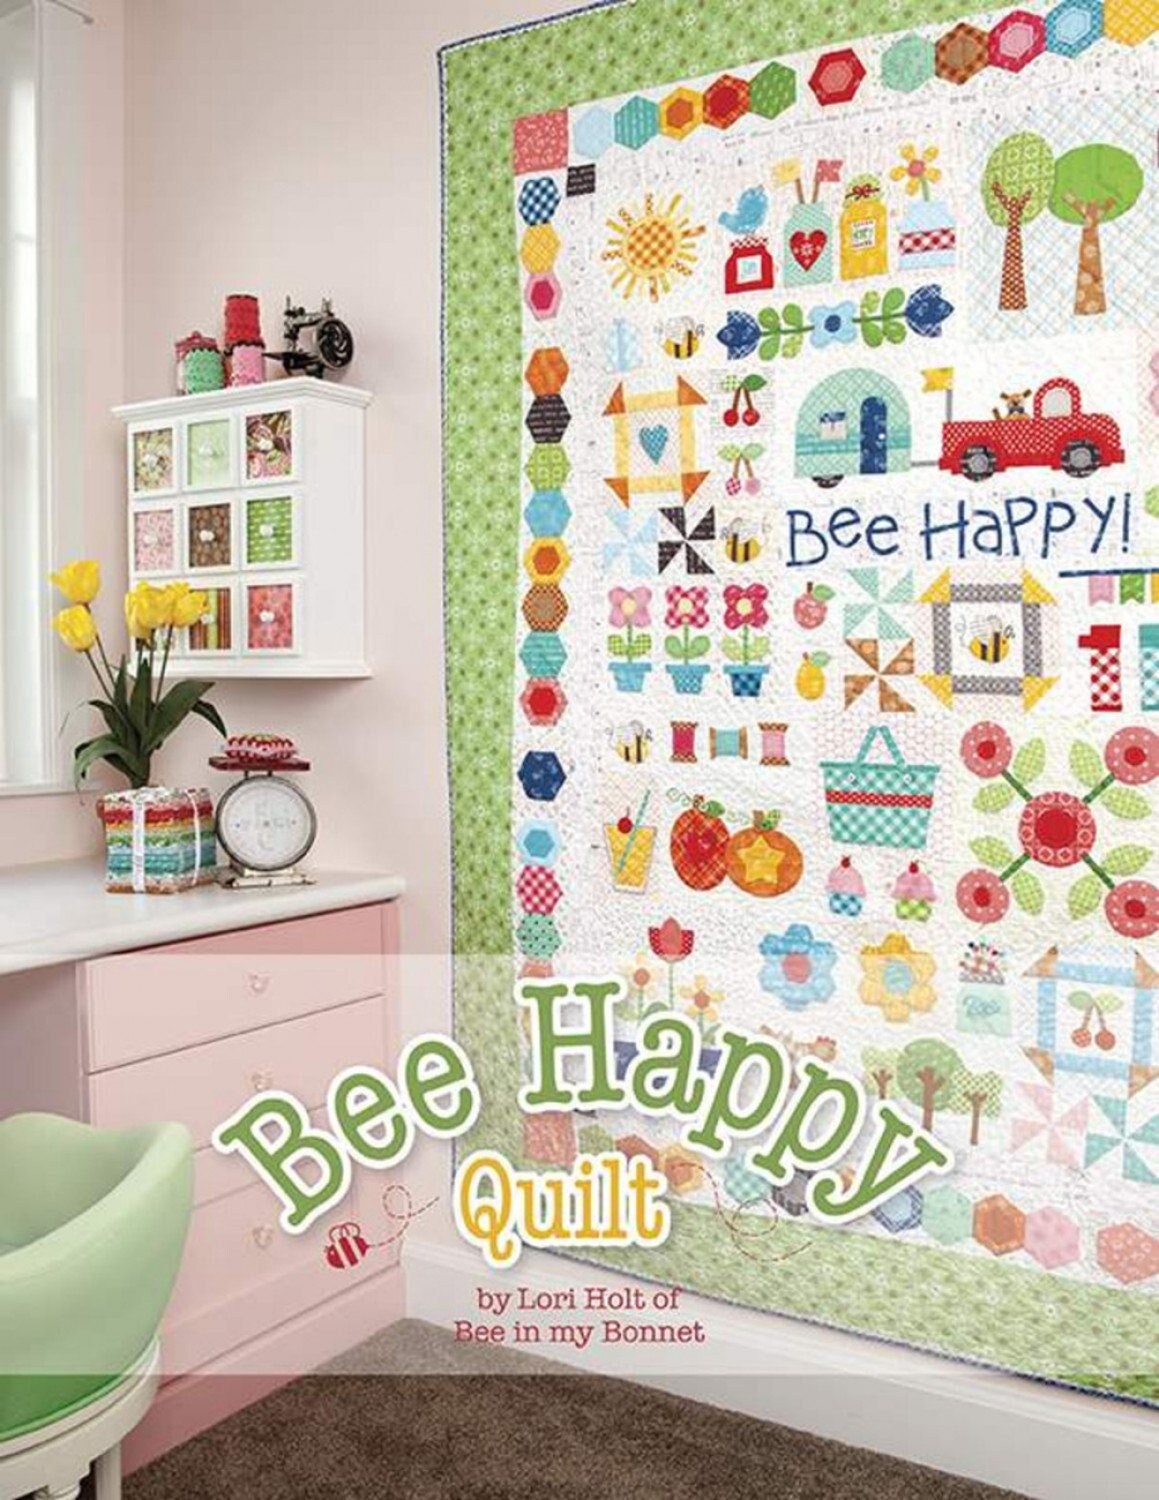 Baby Quilt Kit, Bees, Honey Bees, Flowers Floral, Happy Yellow Orange, Easy  Panel Quilt Kit, Nursery, Fun Sewing Project, New Baby Gift Diy 